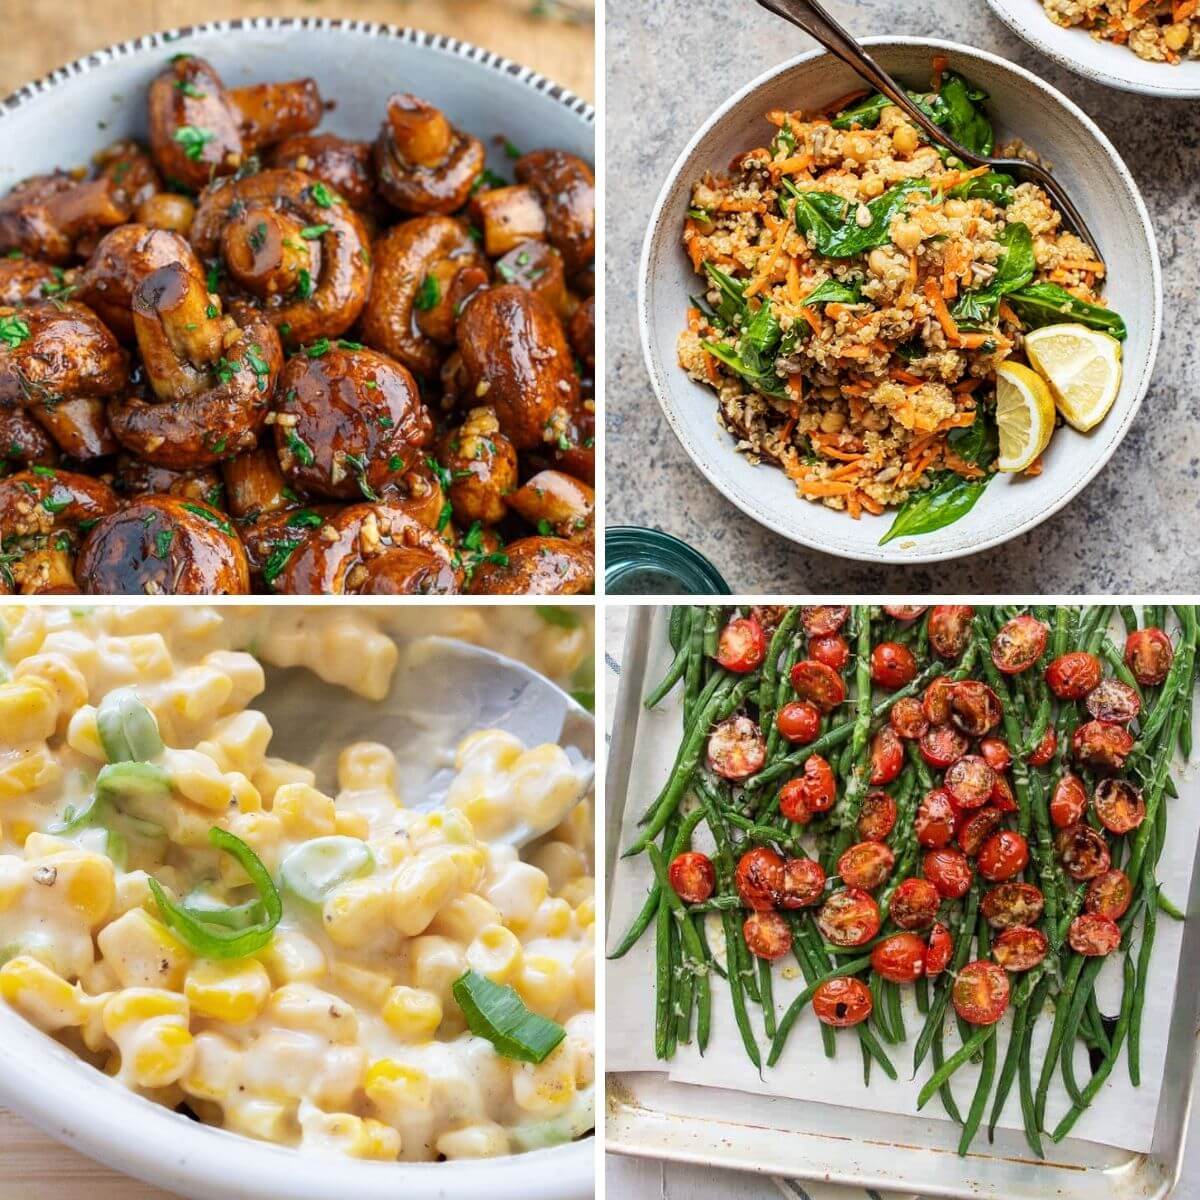 48 Tasty Vegan Side Dish Recipes for Every Occasion